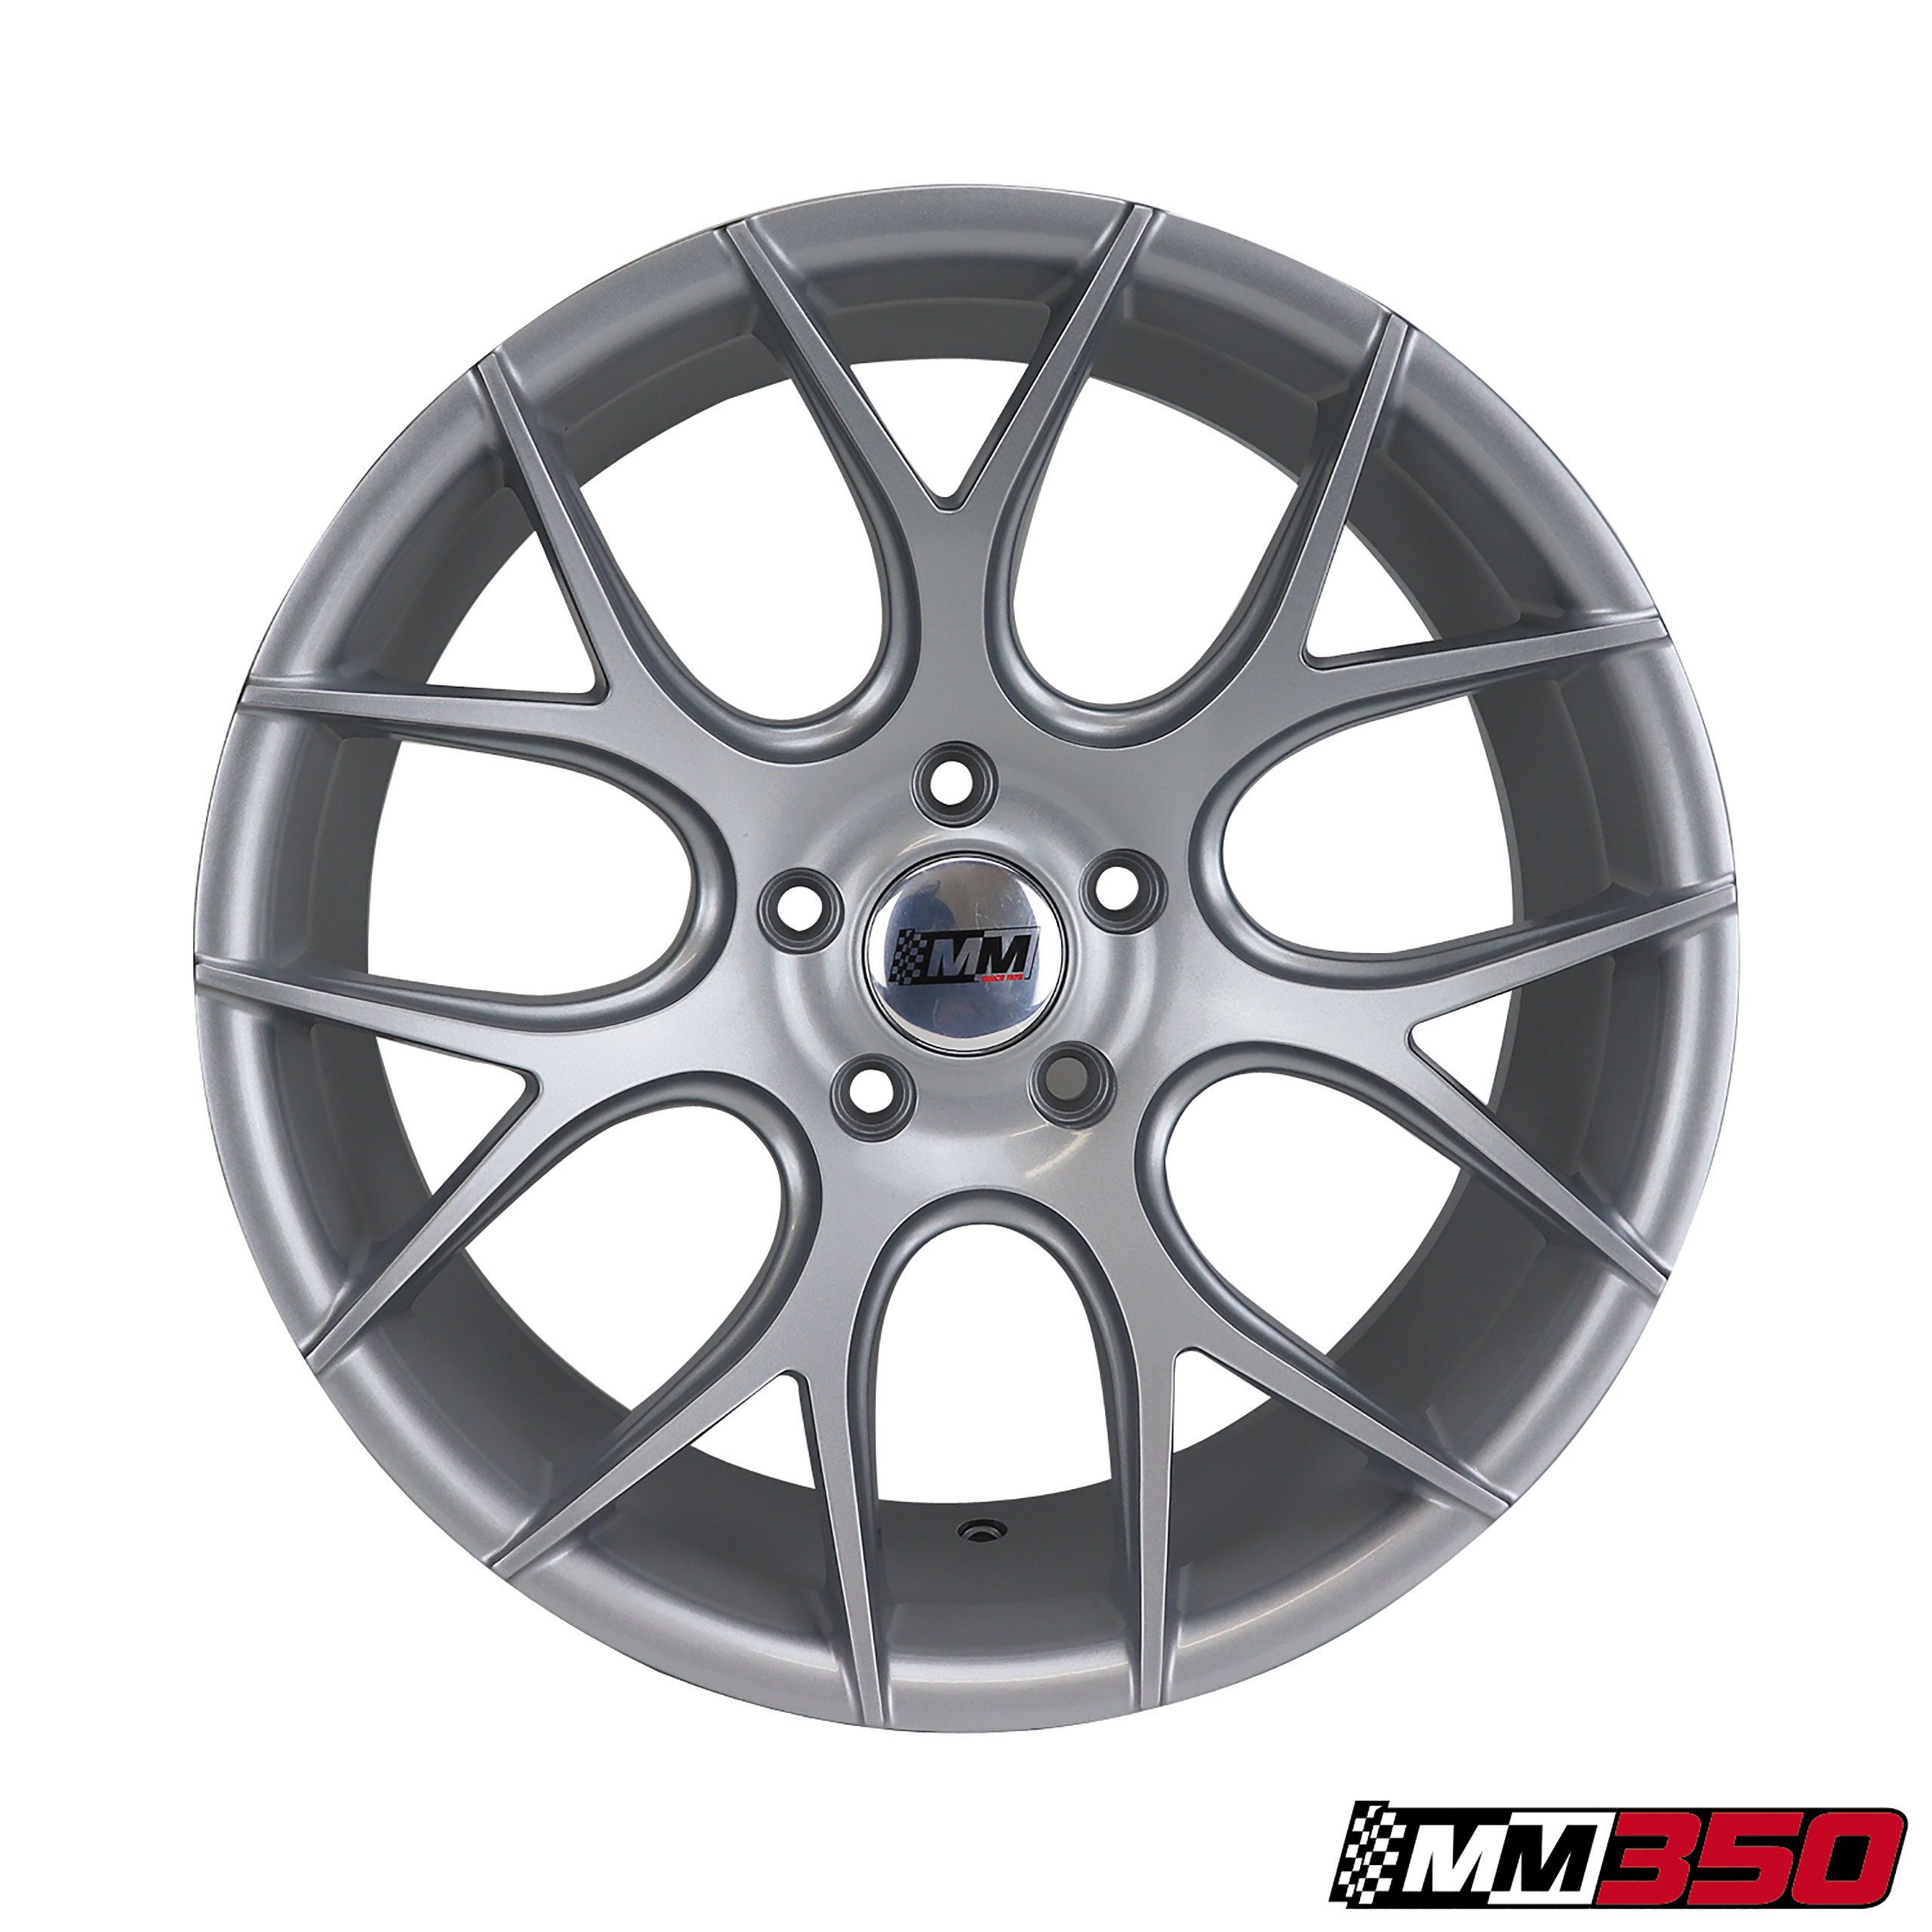 1979-2014 Ford Mustang C3-C7 MM350 18x9 Wheel Silver Rear Only CA-MA12380 